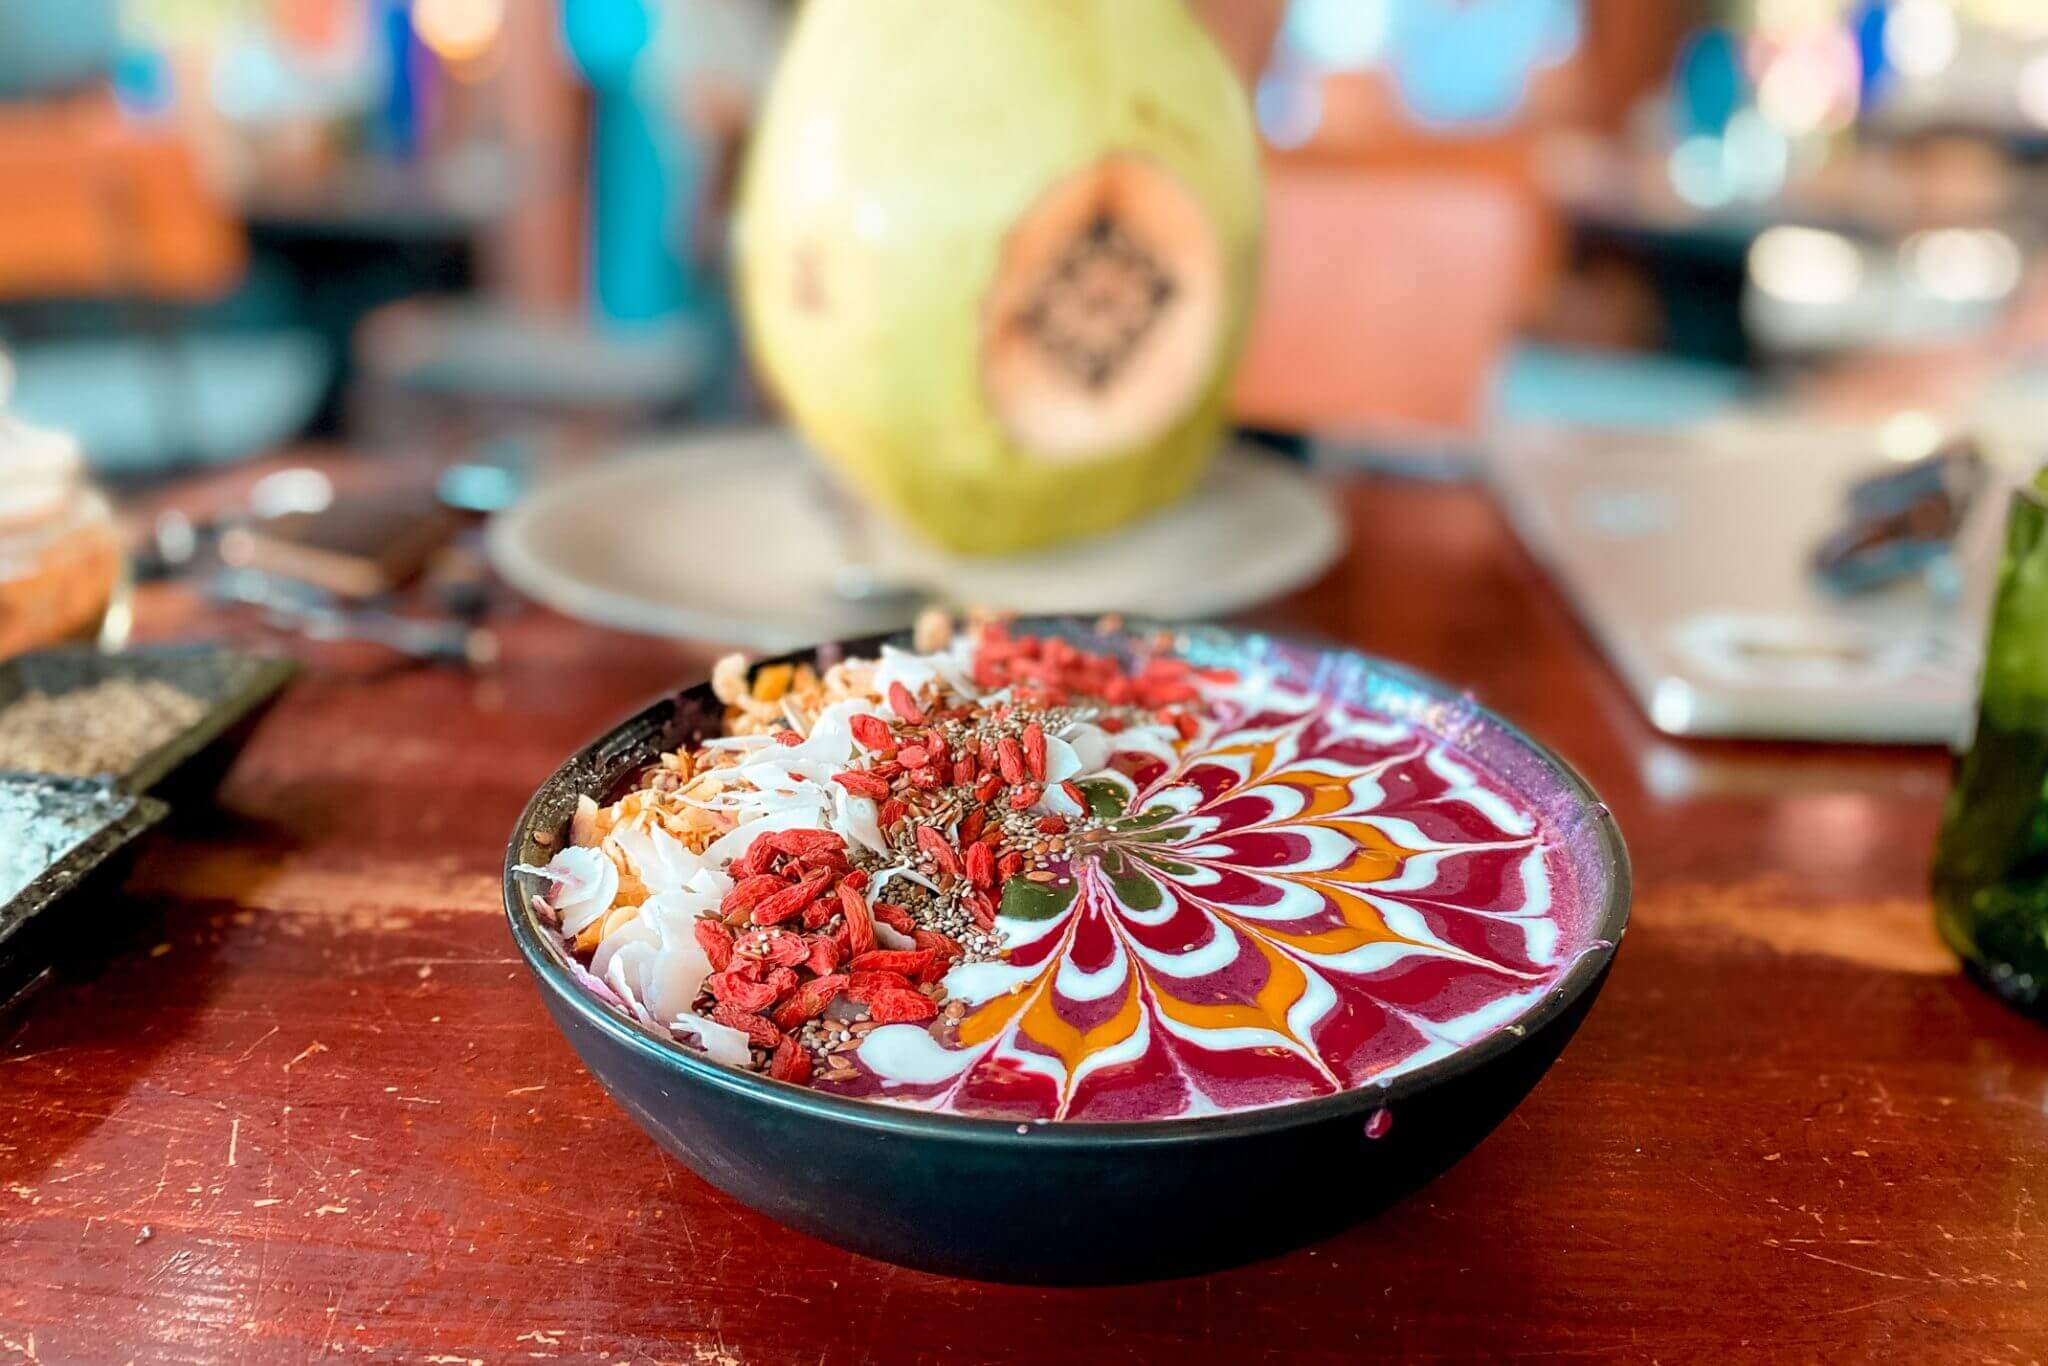 A guide to exploring Canggu, Bali: The best things to do, see and eat